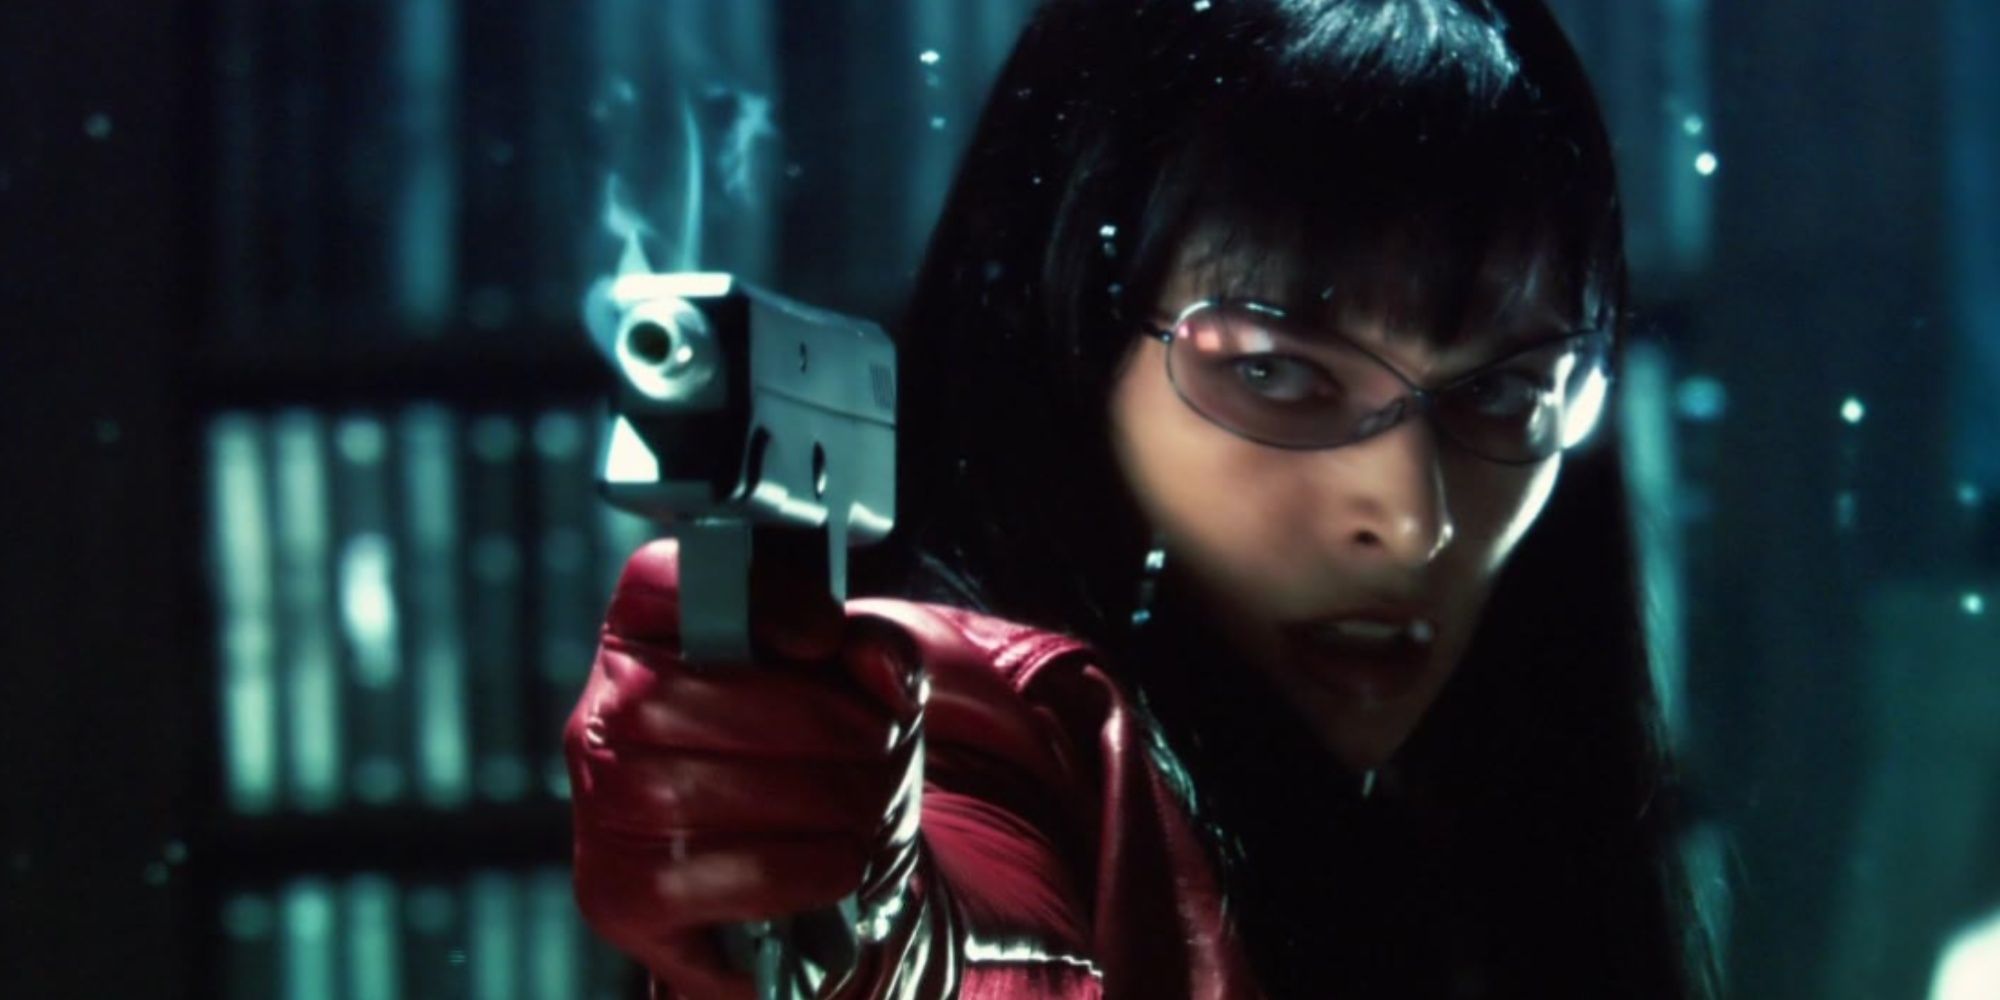 Close-up of Milla Jovovich in Ultraviolet as the main protagonist, with unique glasses and a smoking weapon pointed at enemies off-screen.